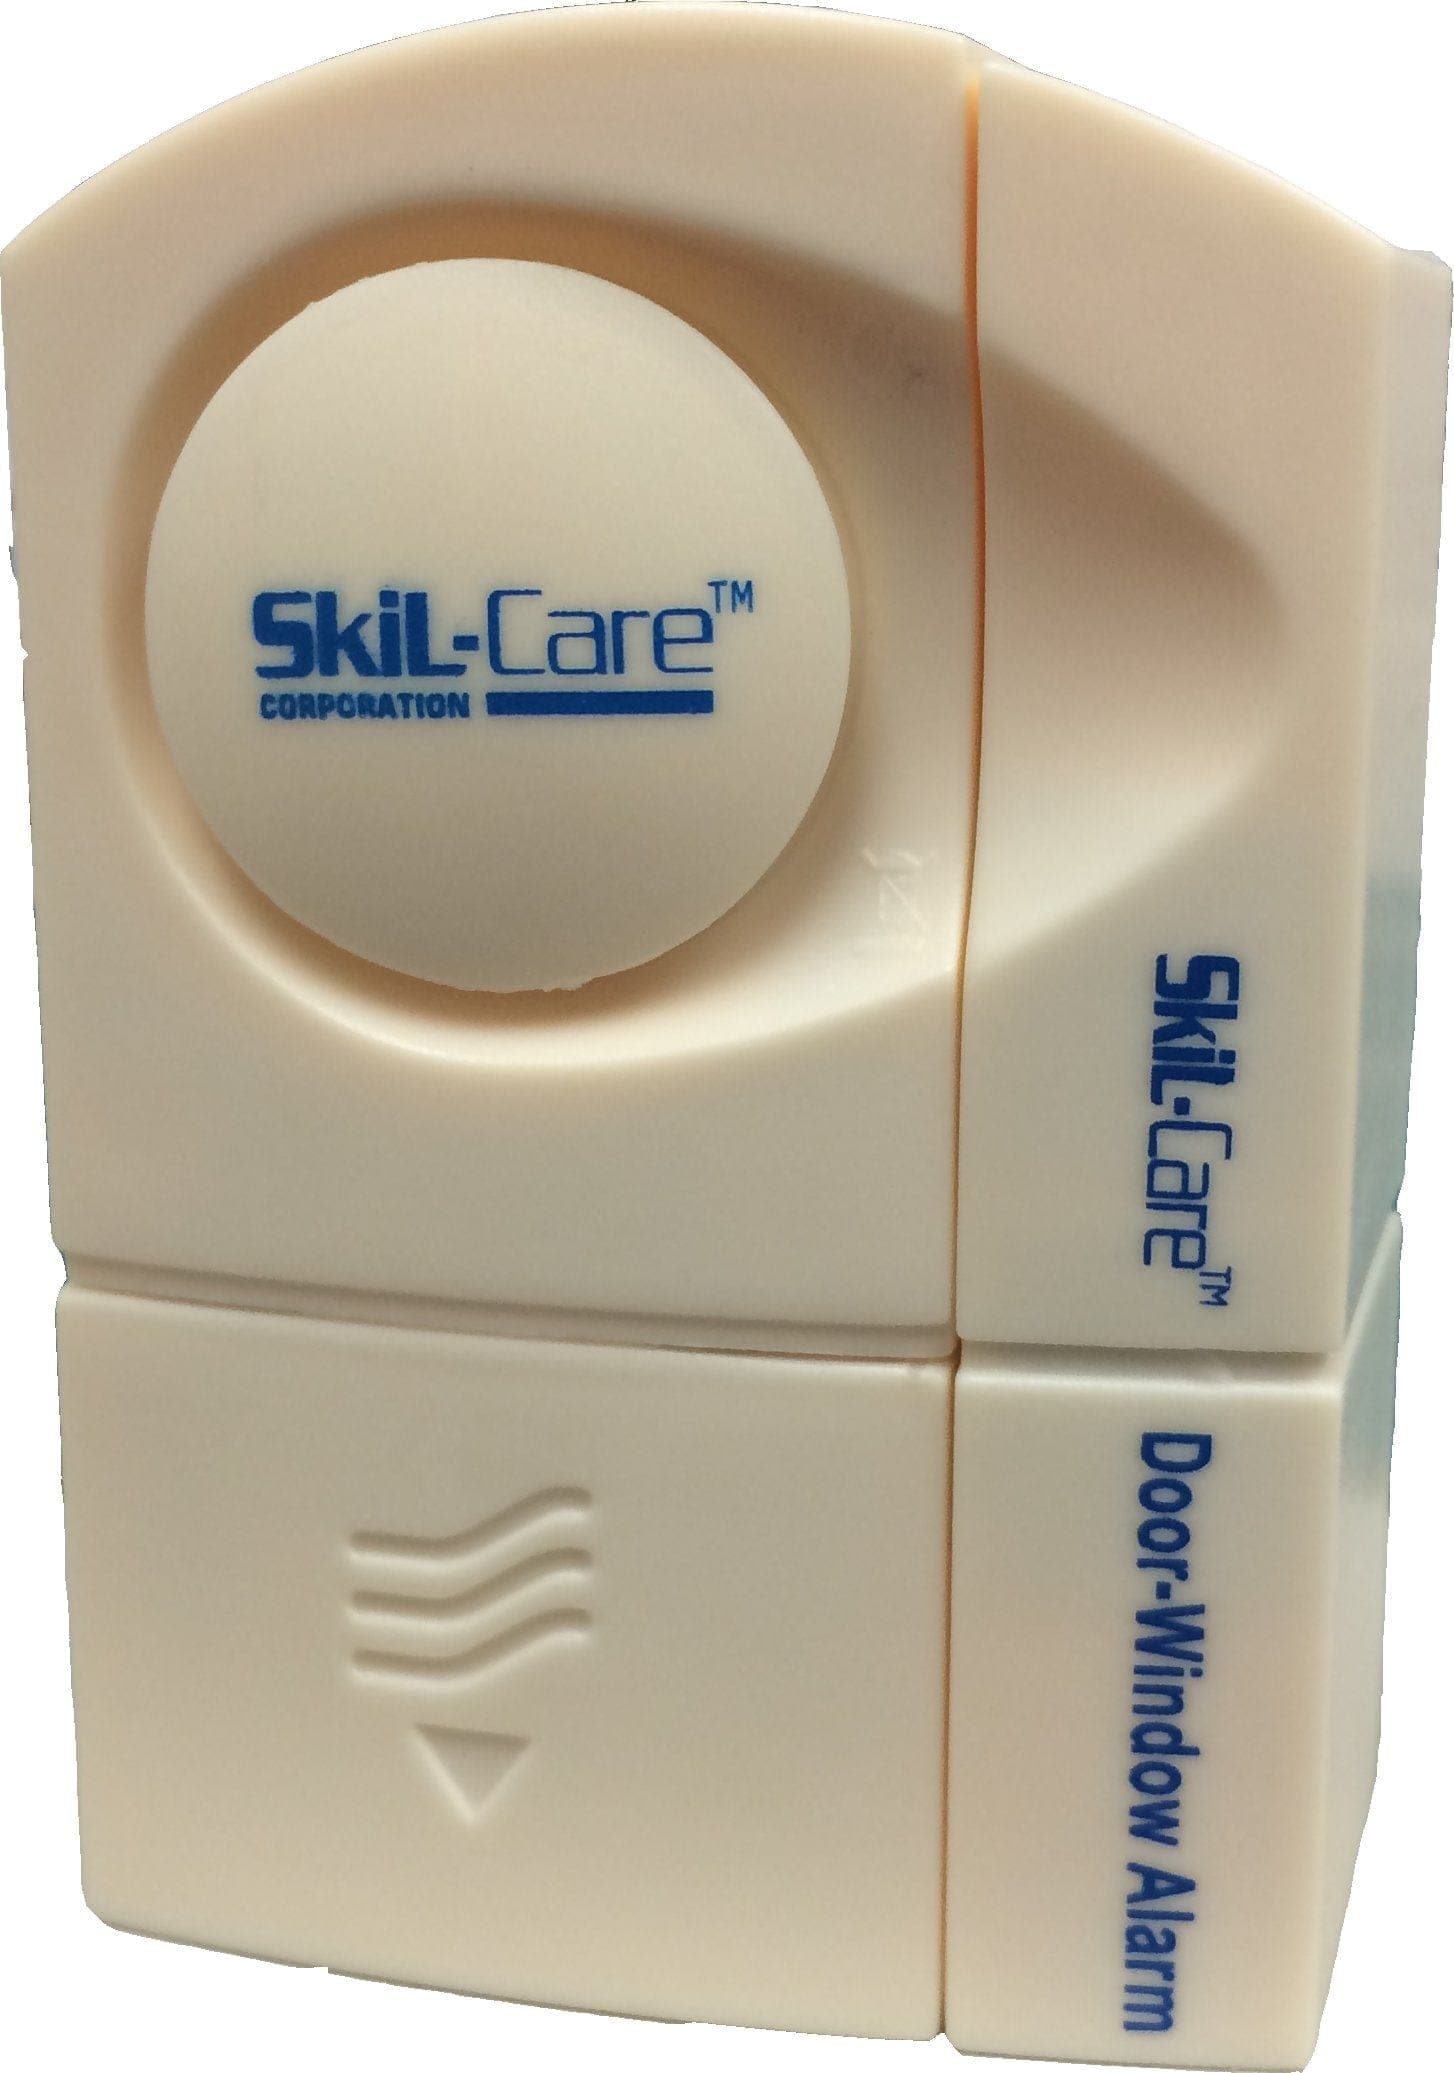 SkilCare Safety Single Item SkilCare Window Alarm with Magnetic Cord